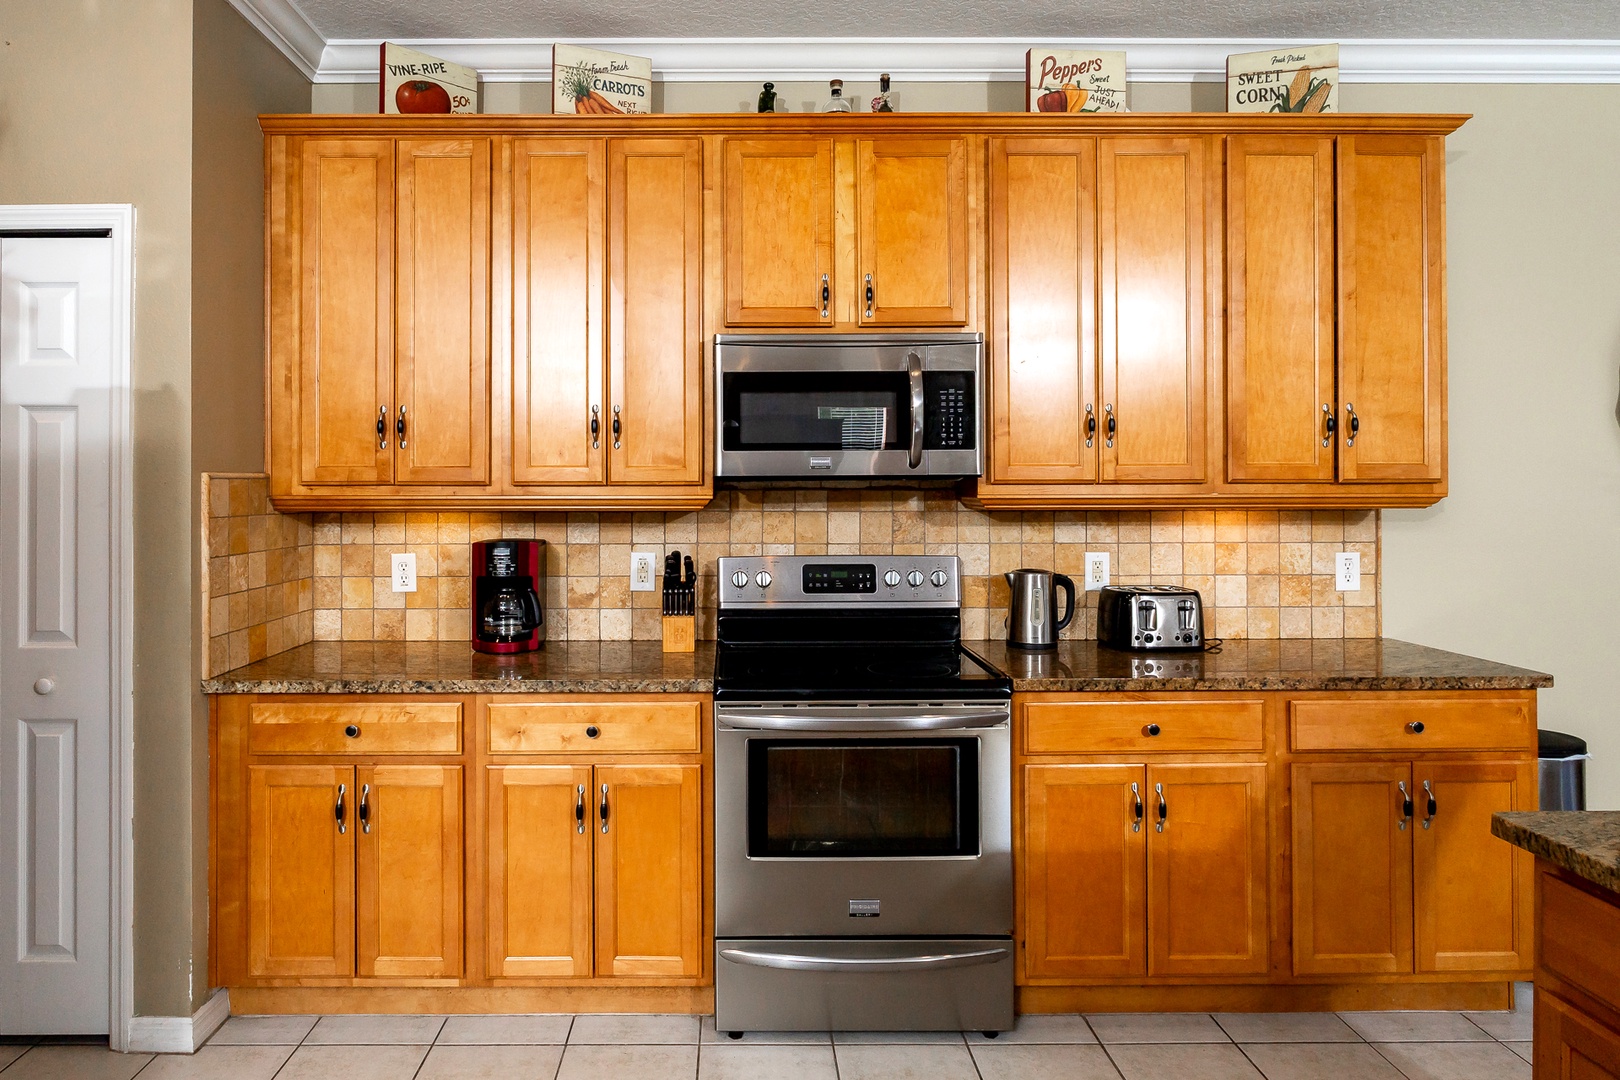 The open, well-equipped kitchen offers ample space & all the comforts of home